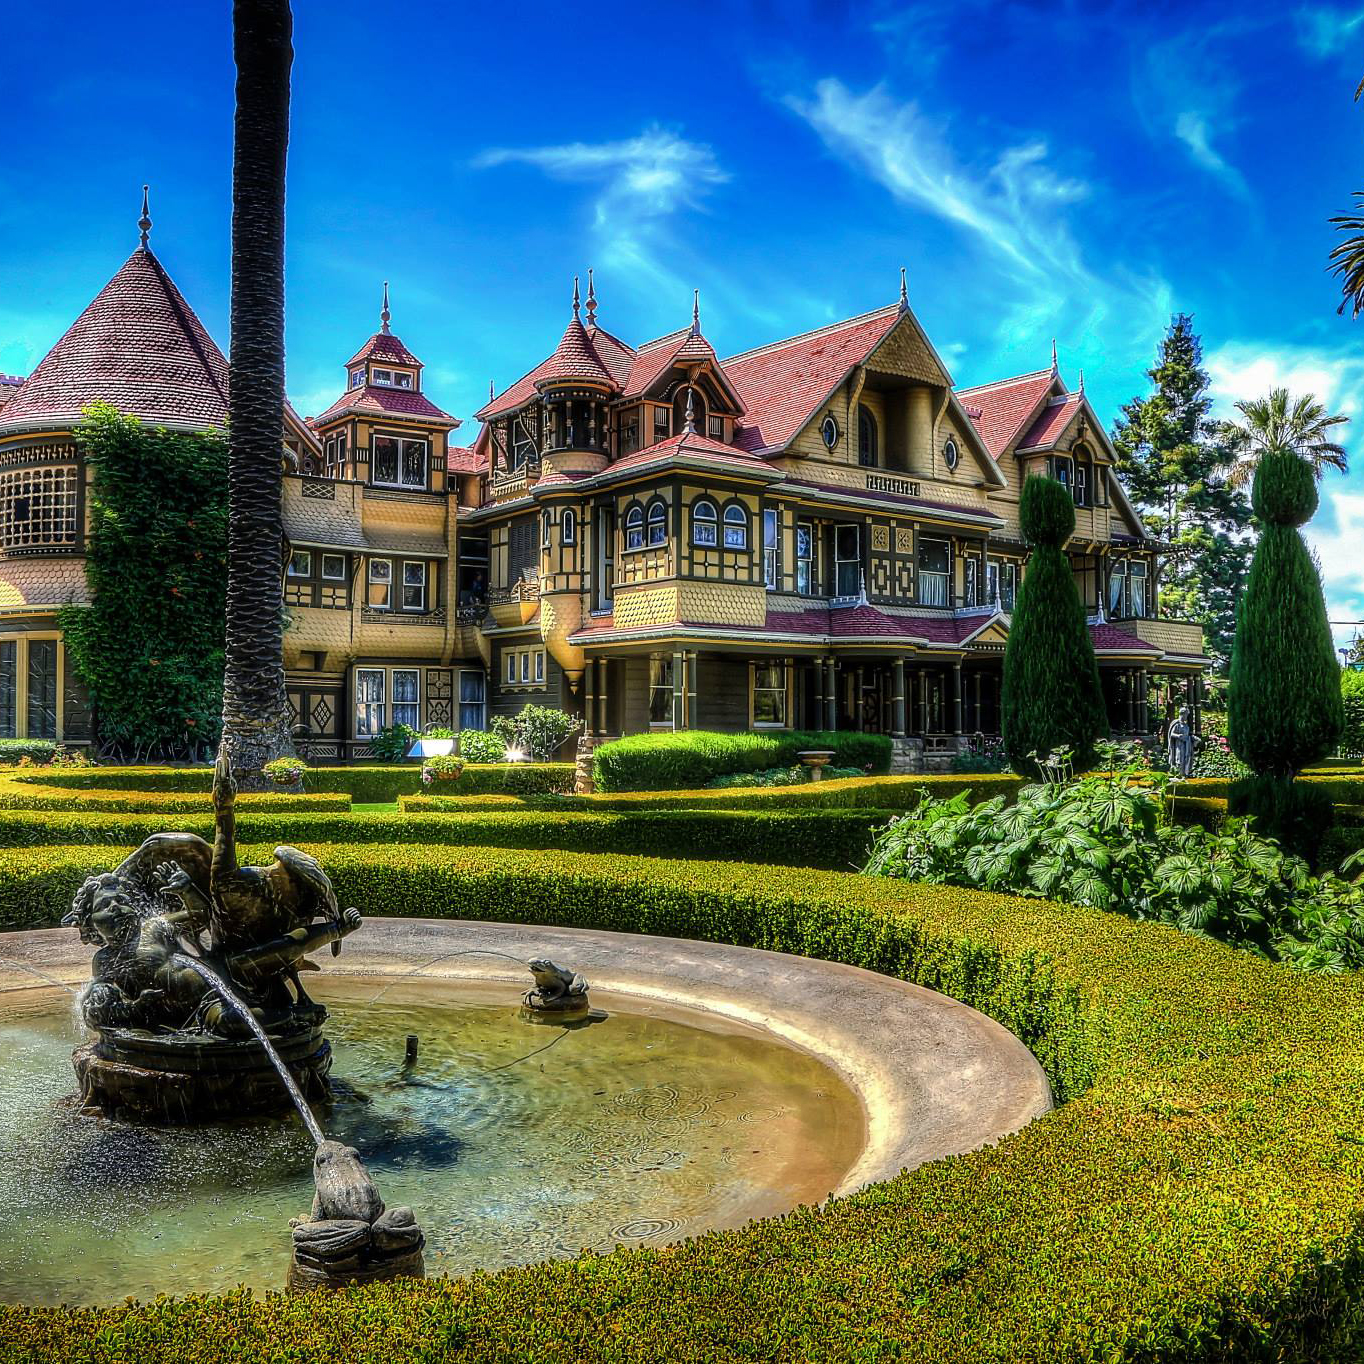 https://www.sanjose.org/sites/default/files/2019-04/winchester-mystery-house_0.jpg